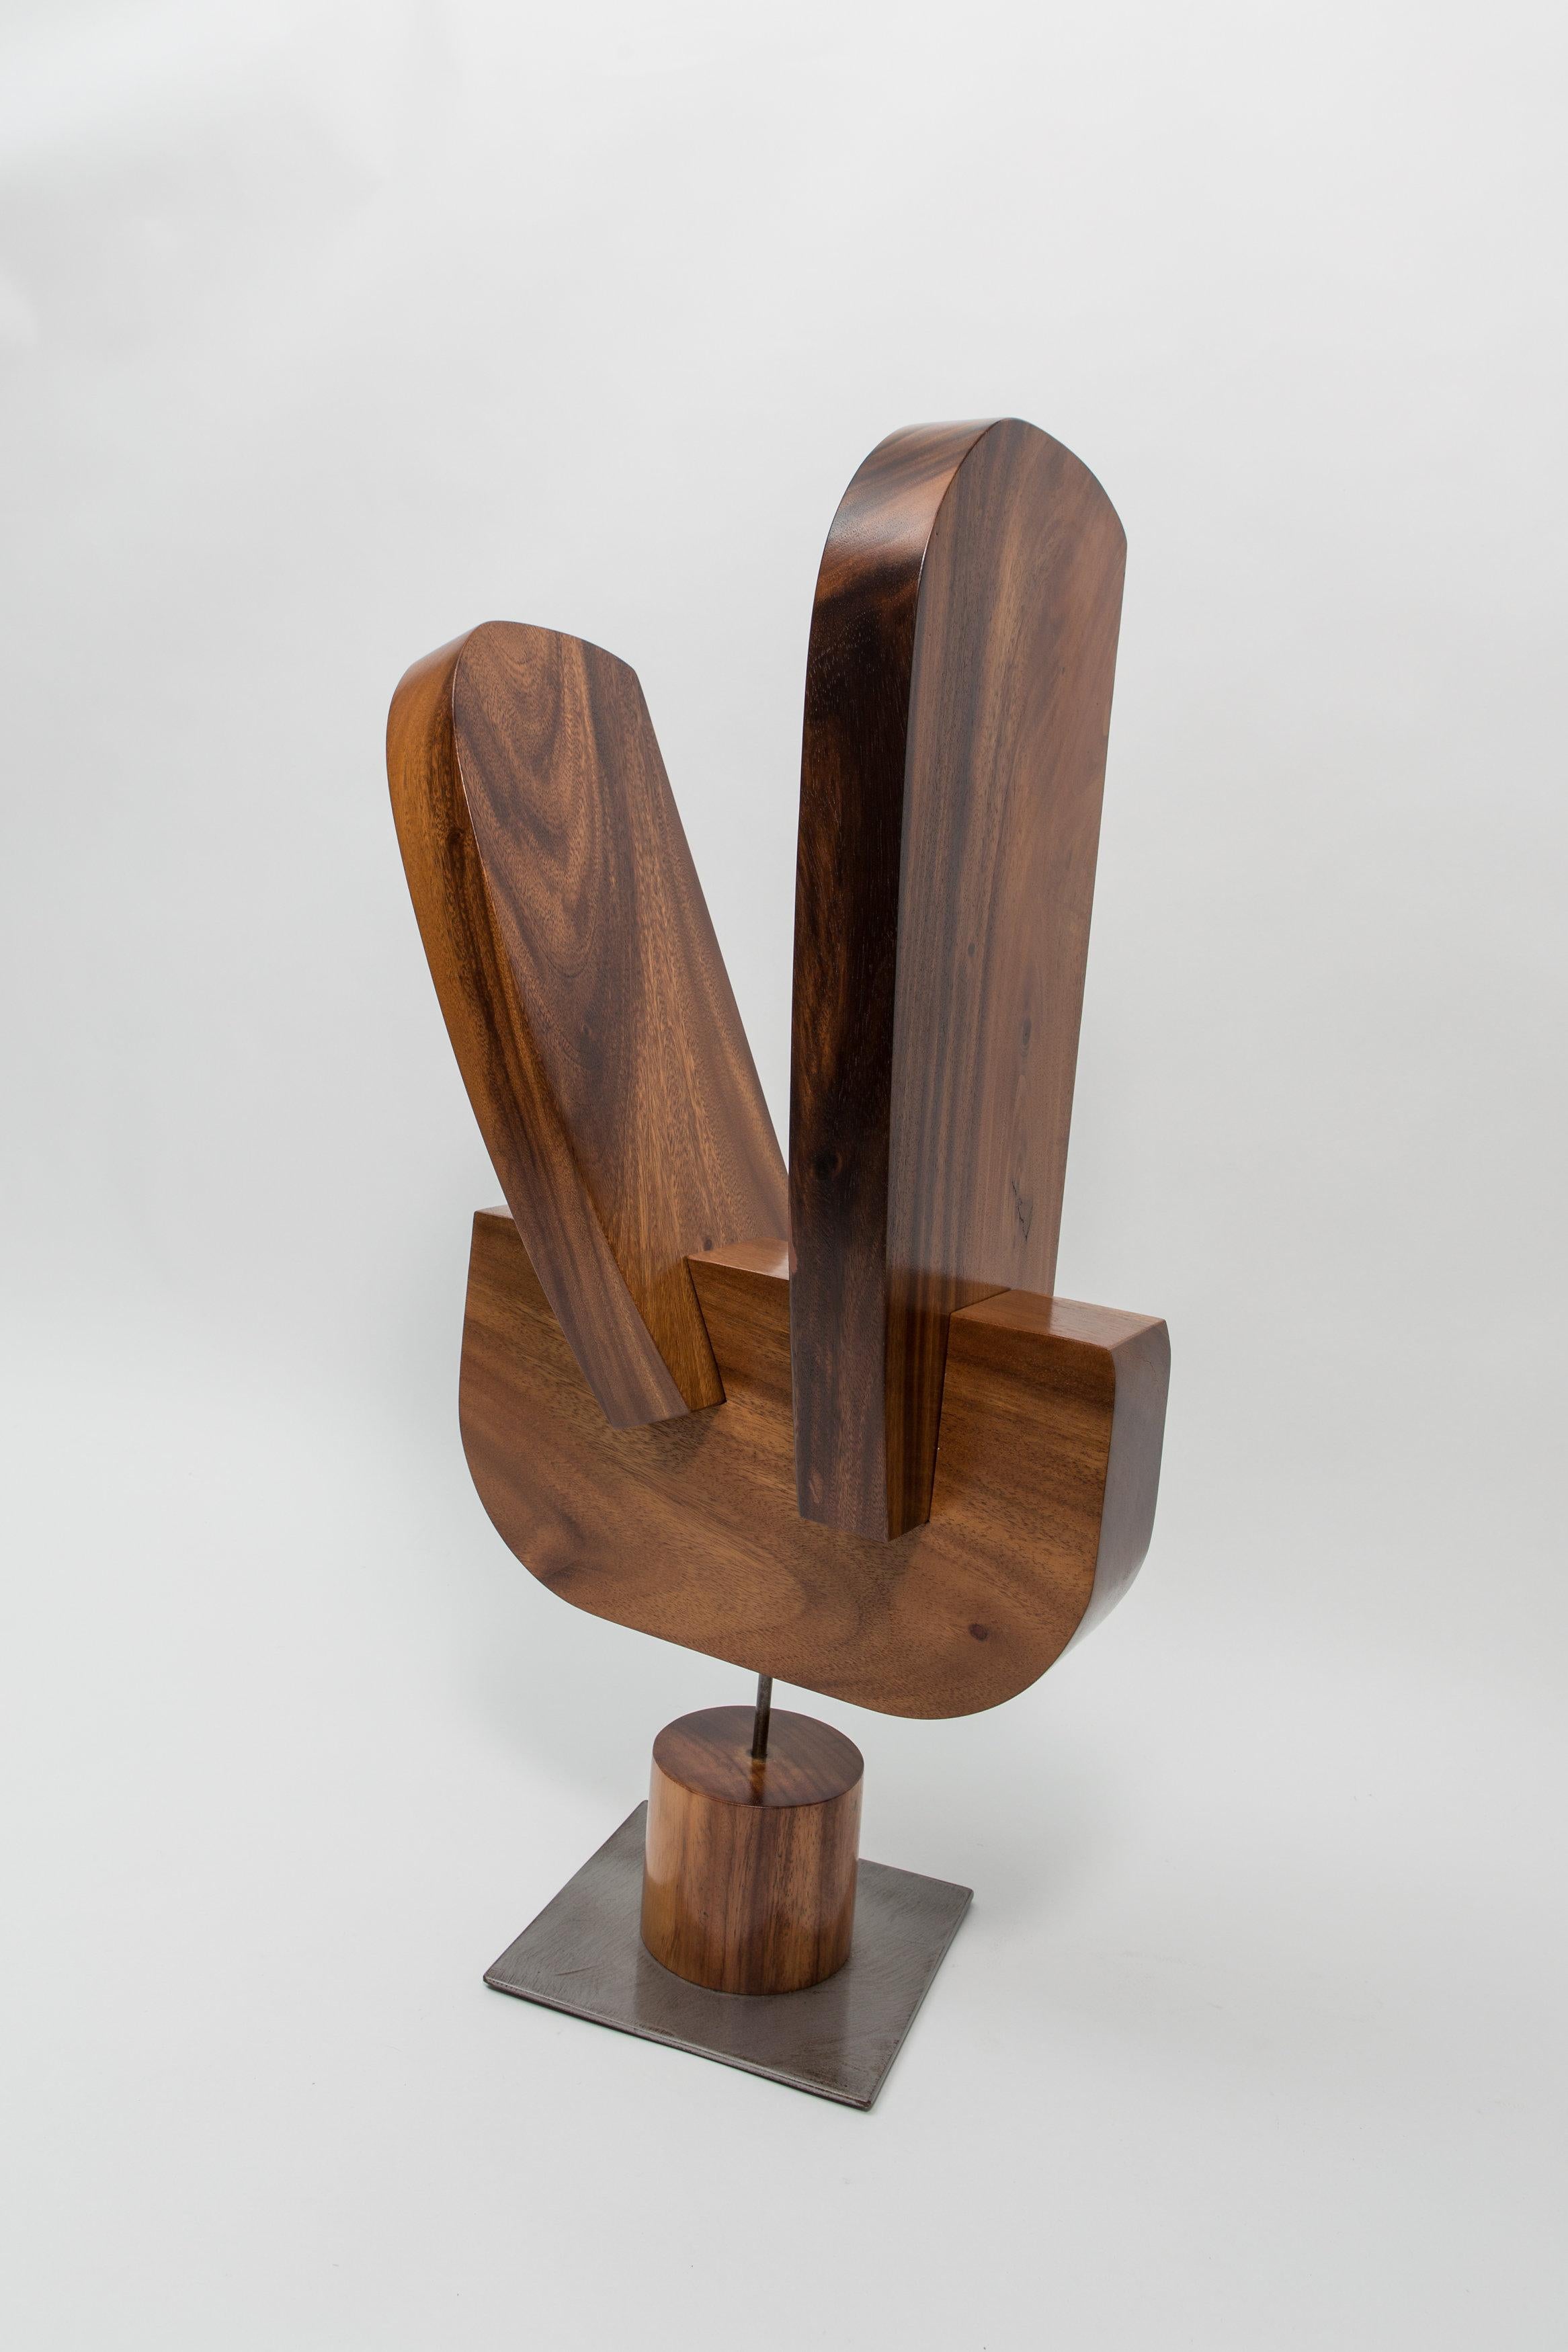 One of a kind, hand carved, laurel wood sculpture by contemporary Costa Rican artist and environmentalist, Gabriela Valenzuela-Hirsch. Gabi is best known for her role as Head designer of Go Silk for over a decade and her artisan design co-op called